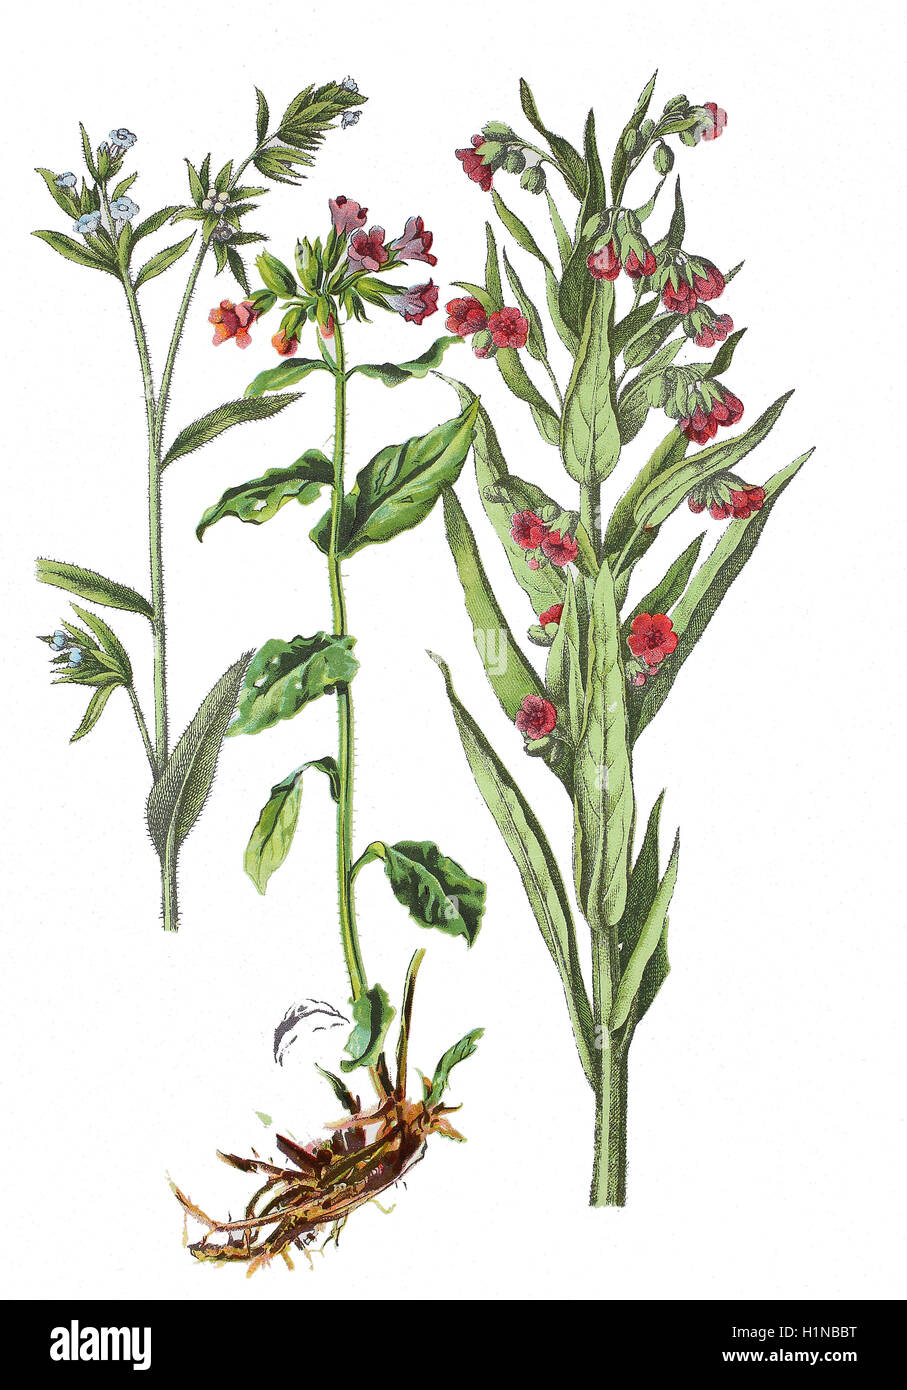 houndstongue, houndstooth, Cynoglossum officinale L. (right), lungwort, common lungwort, Pulmonaria officinalis (center), small bugloss, Lycopsis arvensis (left) Stock Photo